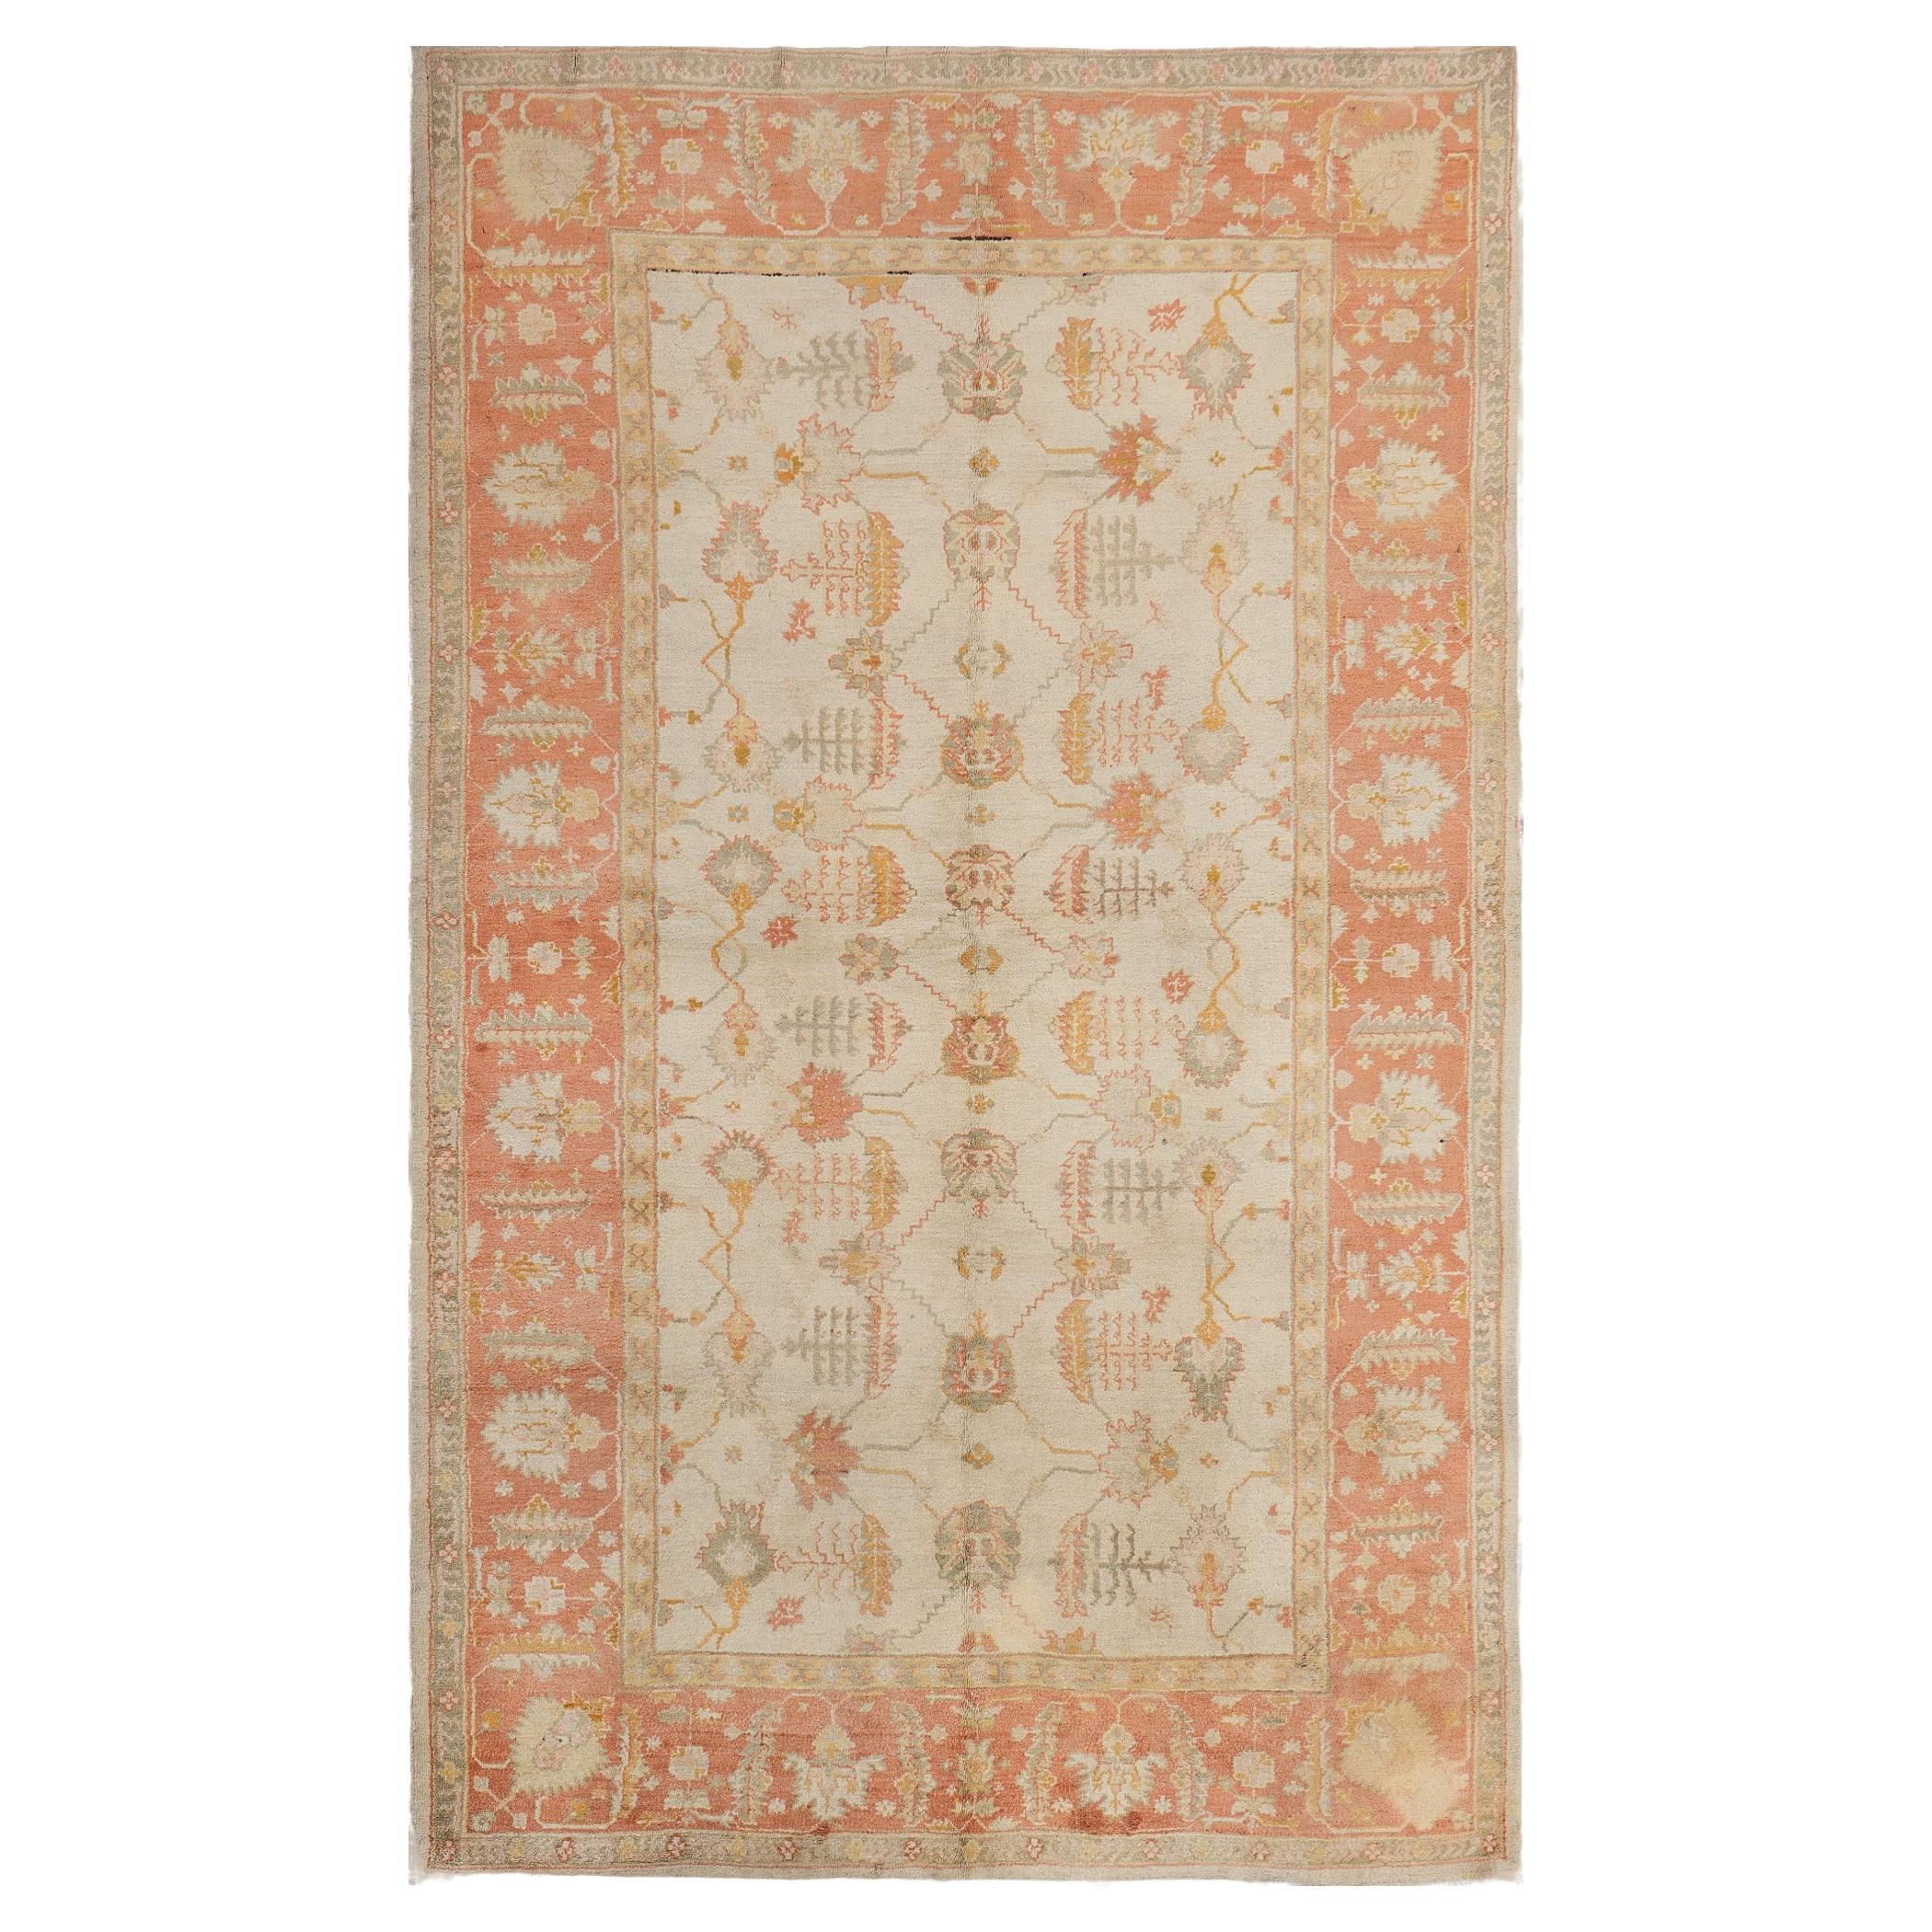 Antique Hand-Knotted Pink Authentic Oushak Rug